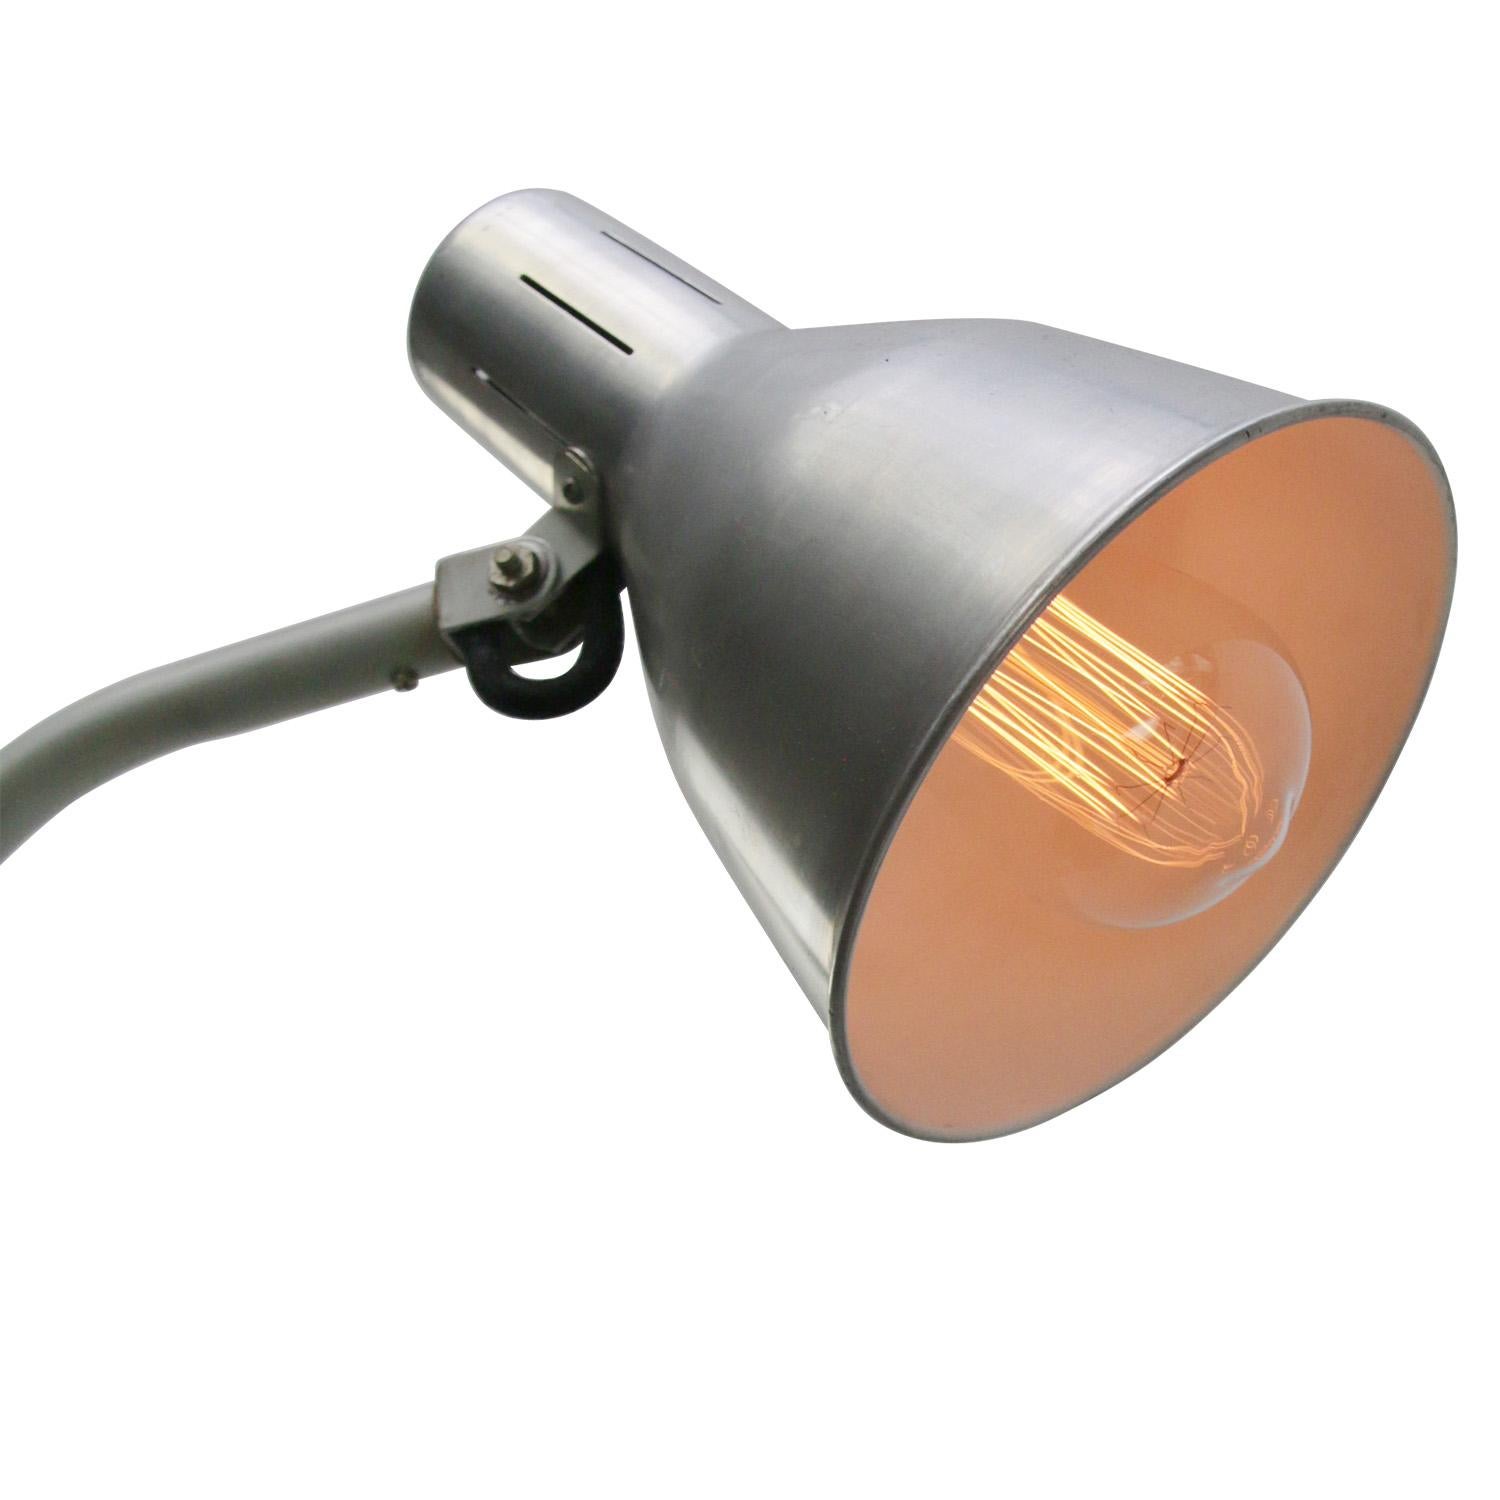 Grey metal industrial 2 arm work light by Hala, Zeist, The Netherlands. Design H. Busquet.
adjustable in height and angle
including plug and switch

E27 / E26

Weight: 1.90 kg / 4.2 lb

Priced per individual item. All lamps have been made